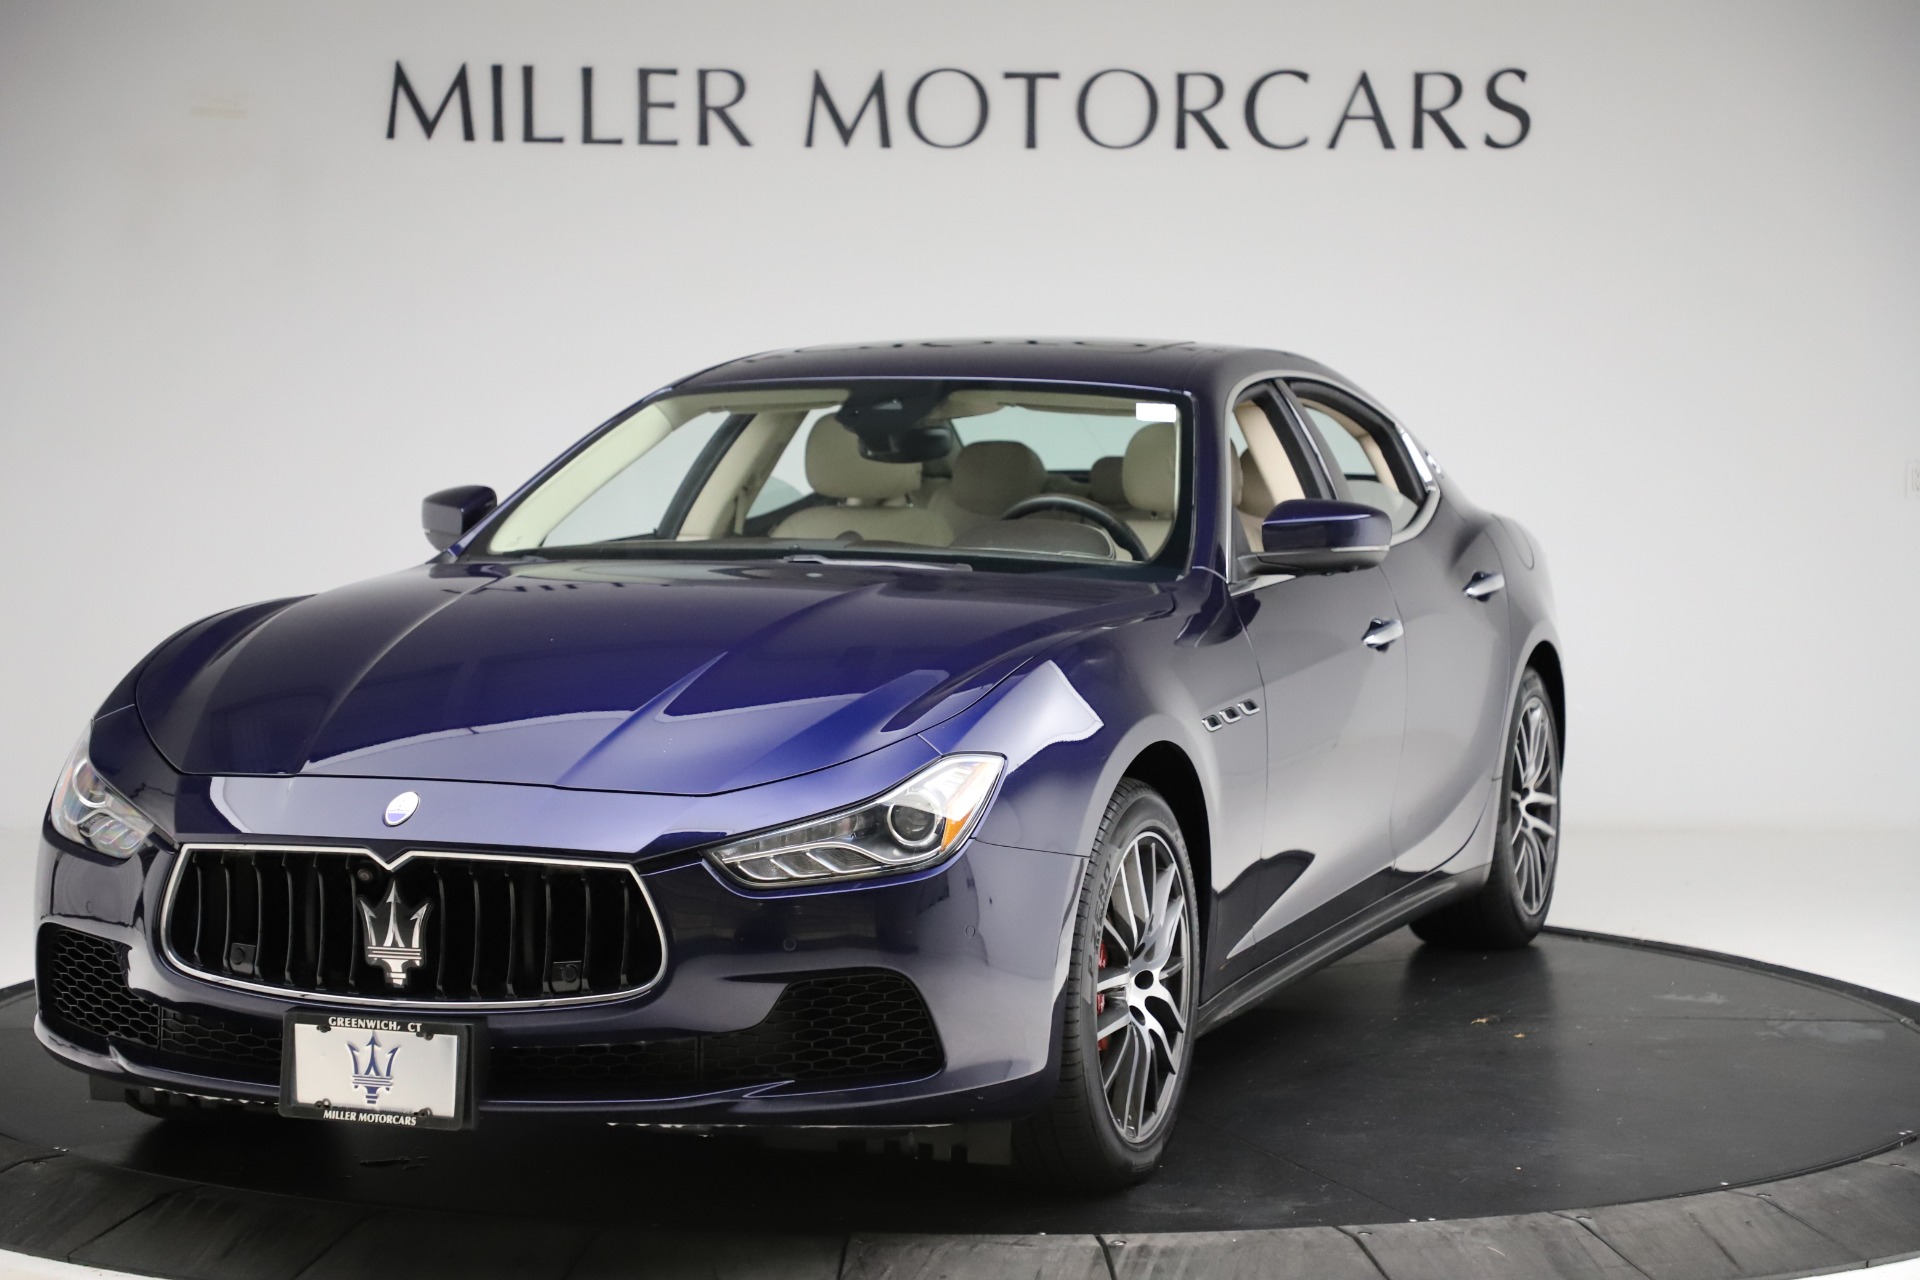 Used 2017 Maserati Ghibli S Q4 for sale Sold at Rolls-Royce Motor Cars Greenwich in Greenwich CT 06830 1